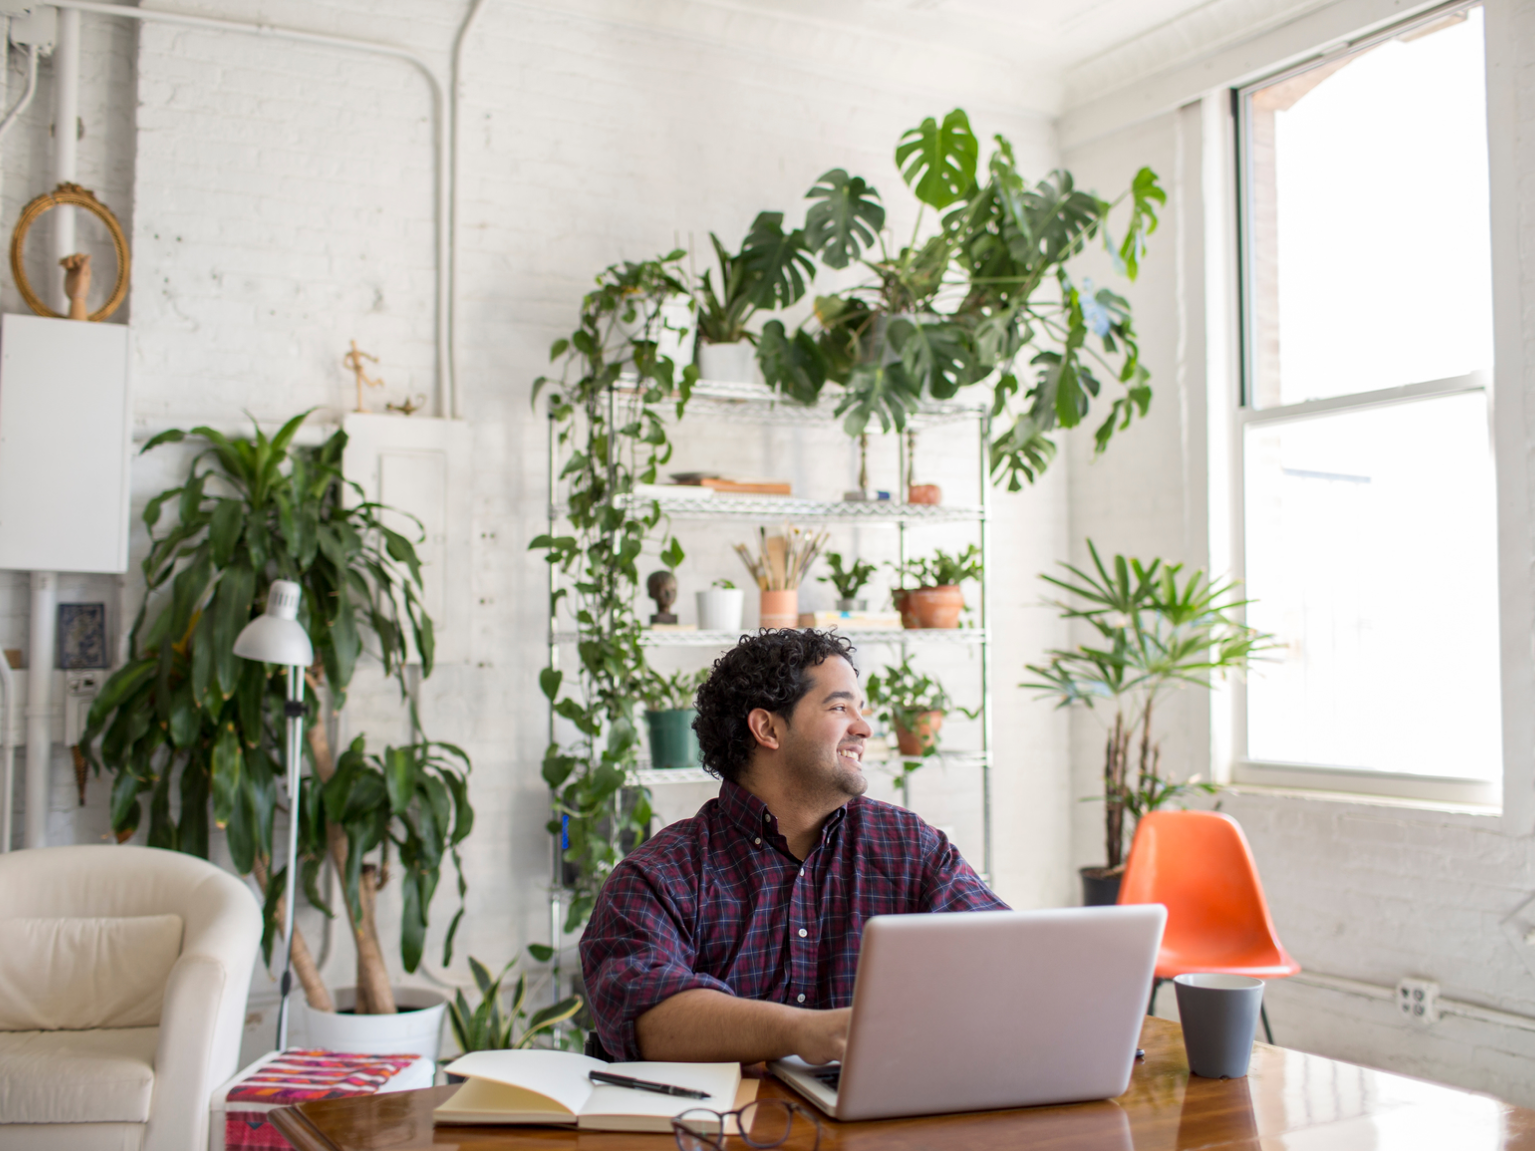 Image of renter working at the table in apartment with plants along the wall